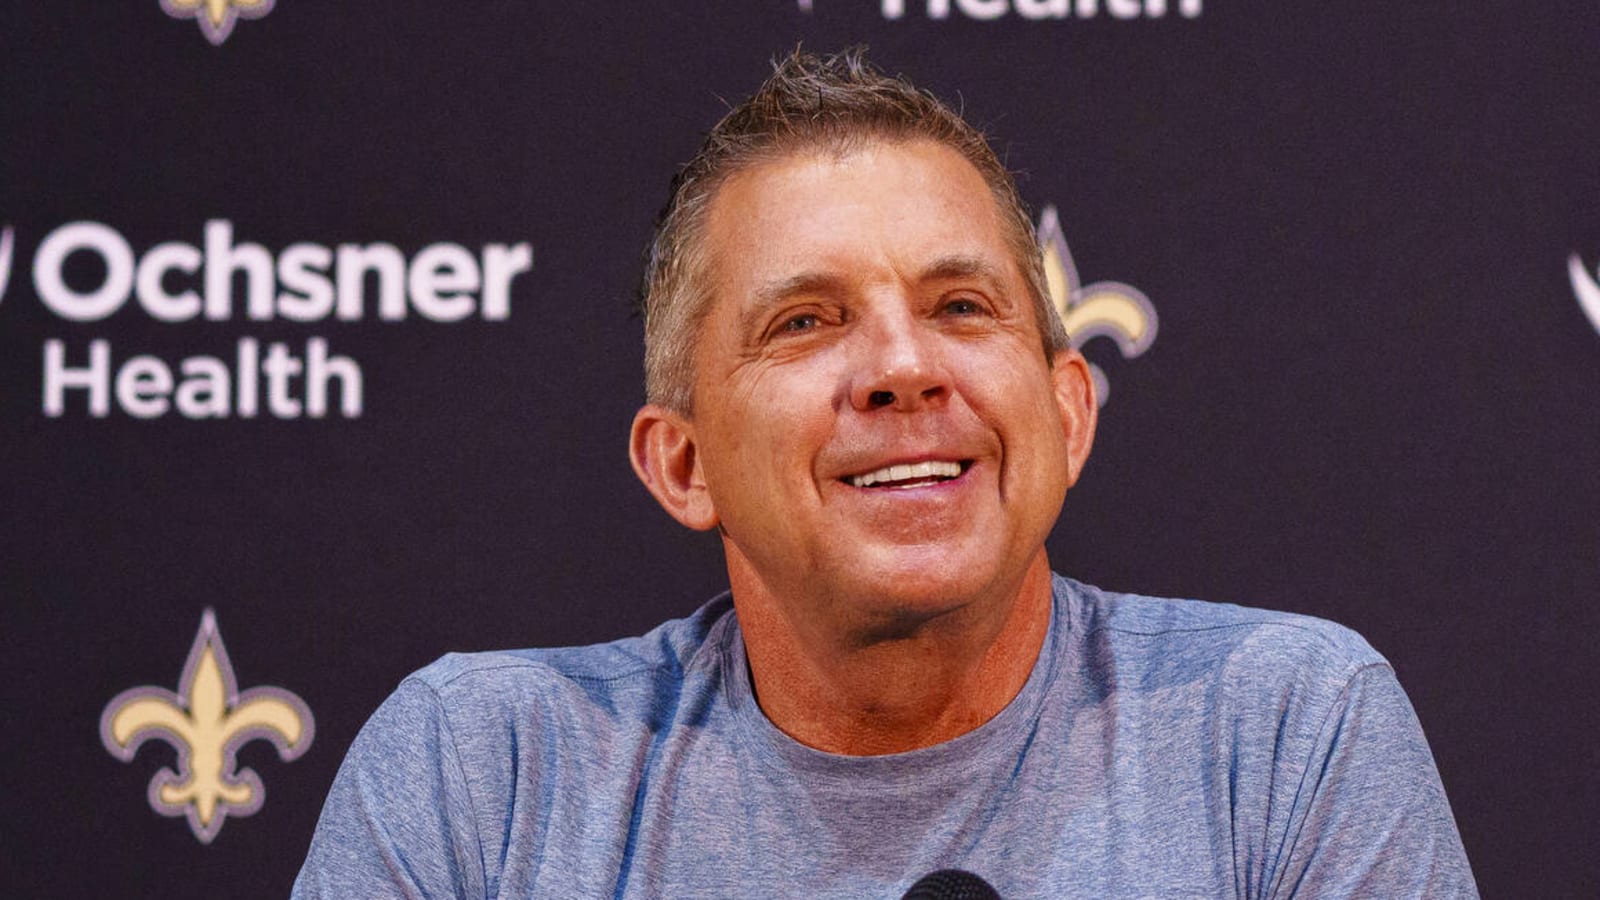 Reports indicate that Payton could pick Cardinals